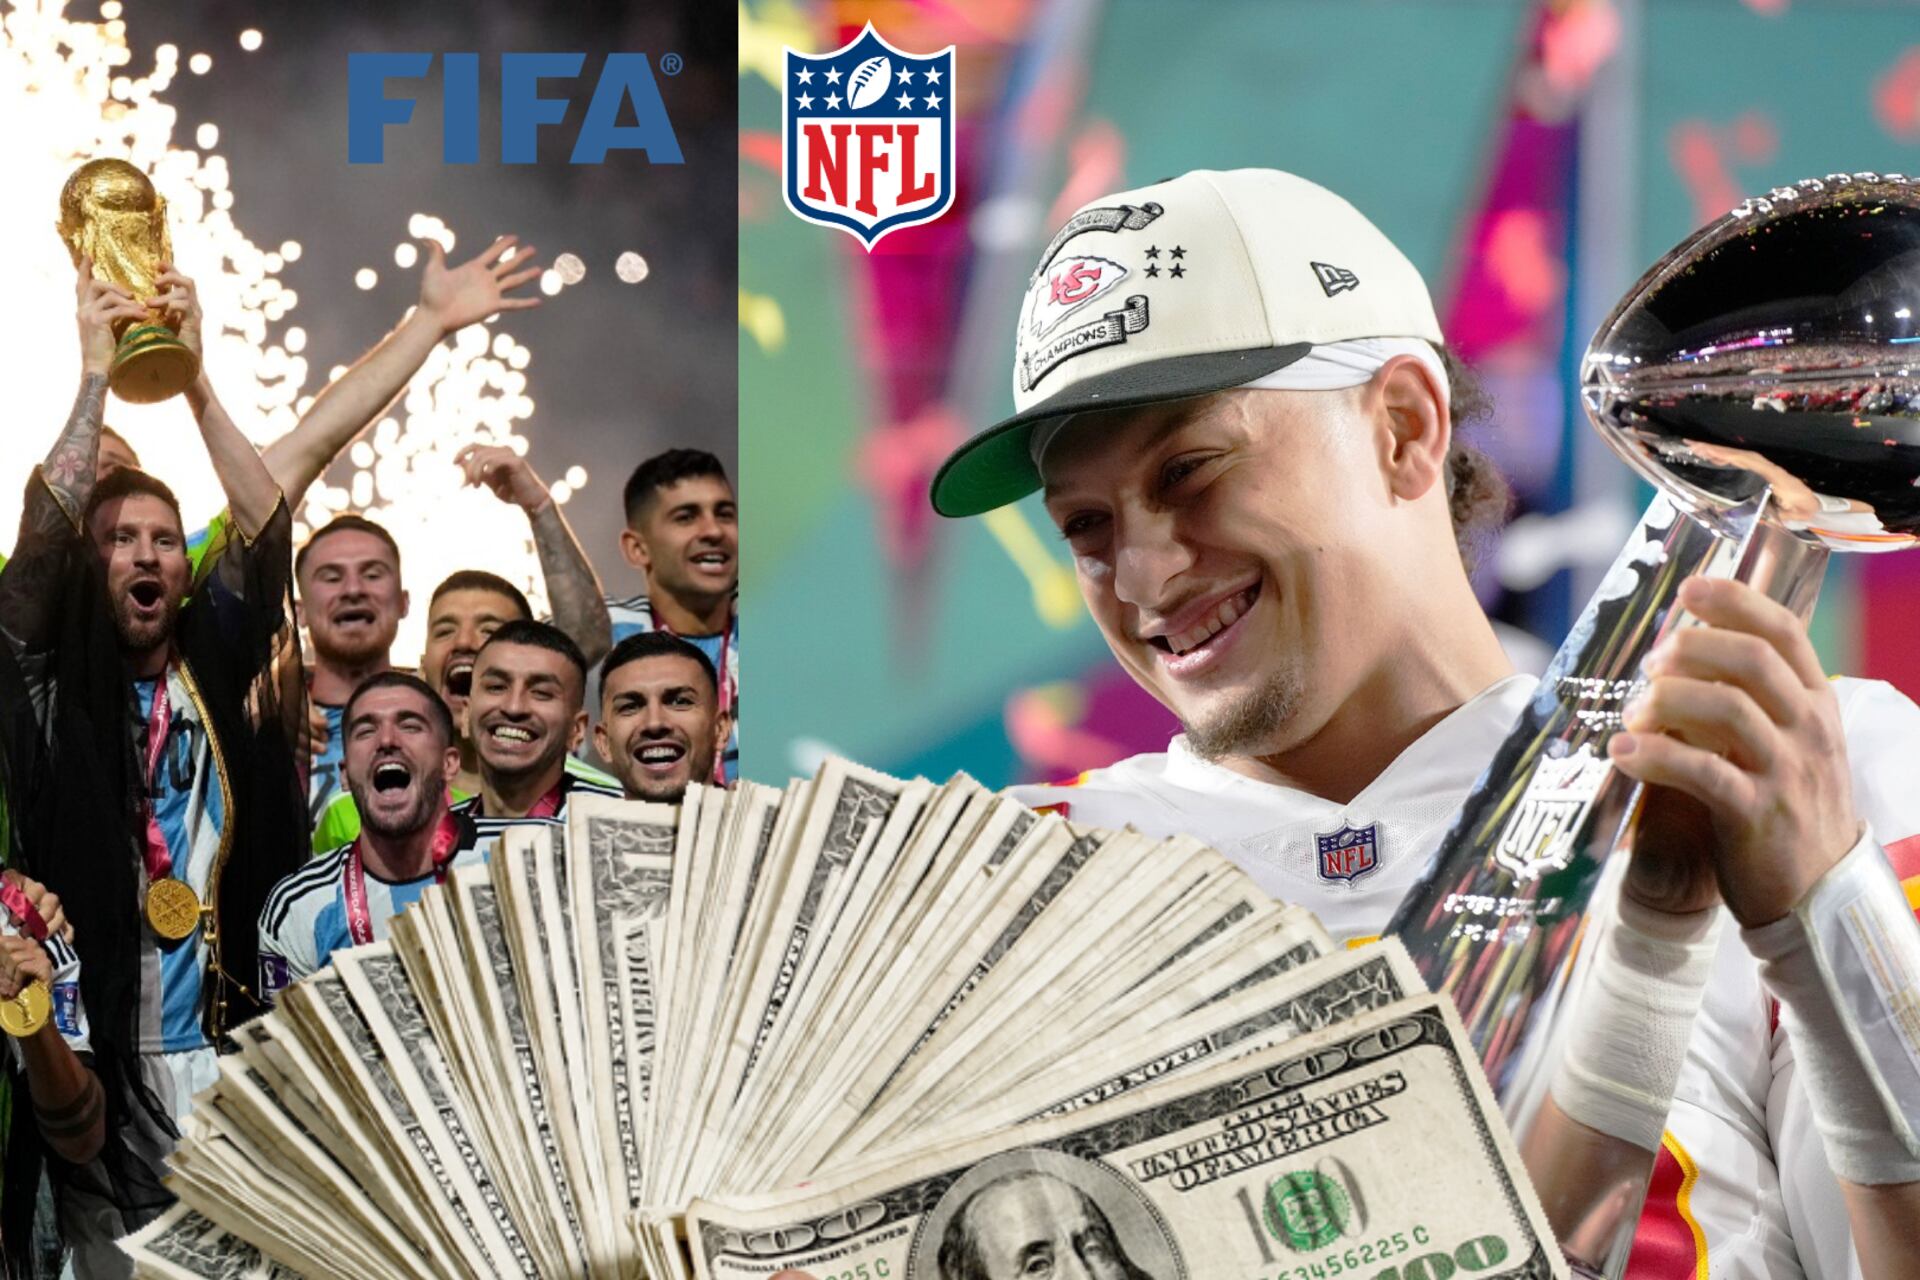 FIFA pays 42 million to the World Cup winner, what NFL gives to Superbowl winner